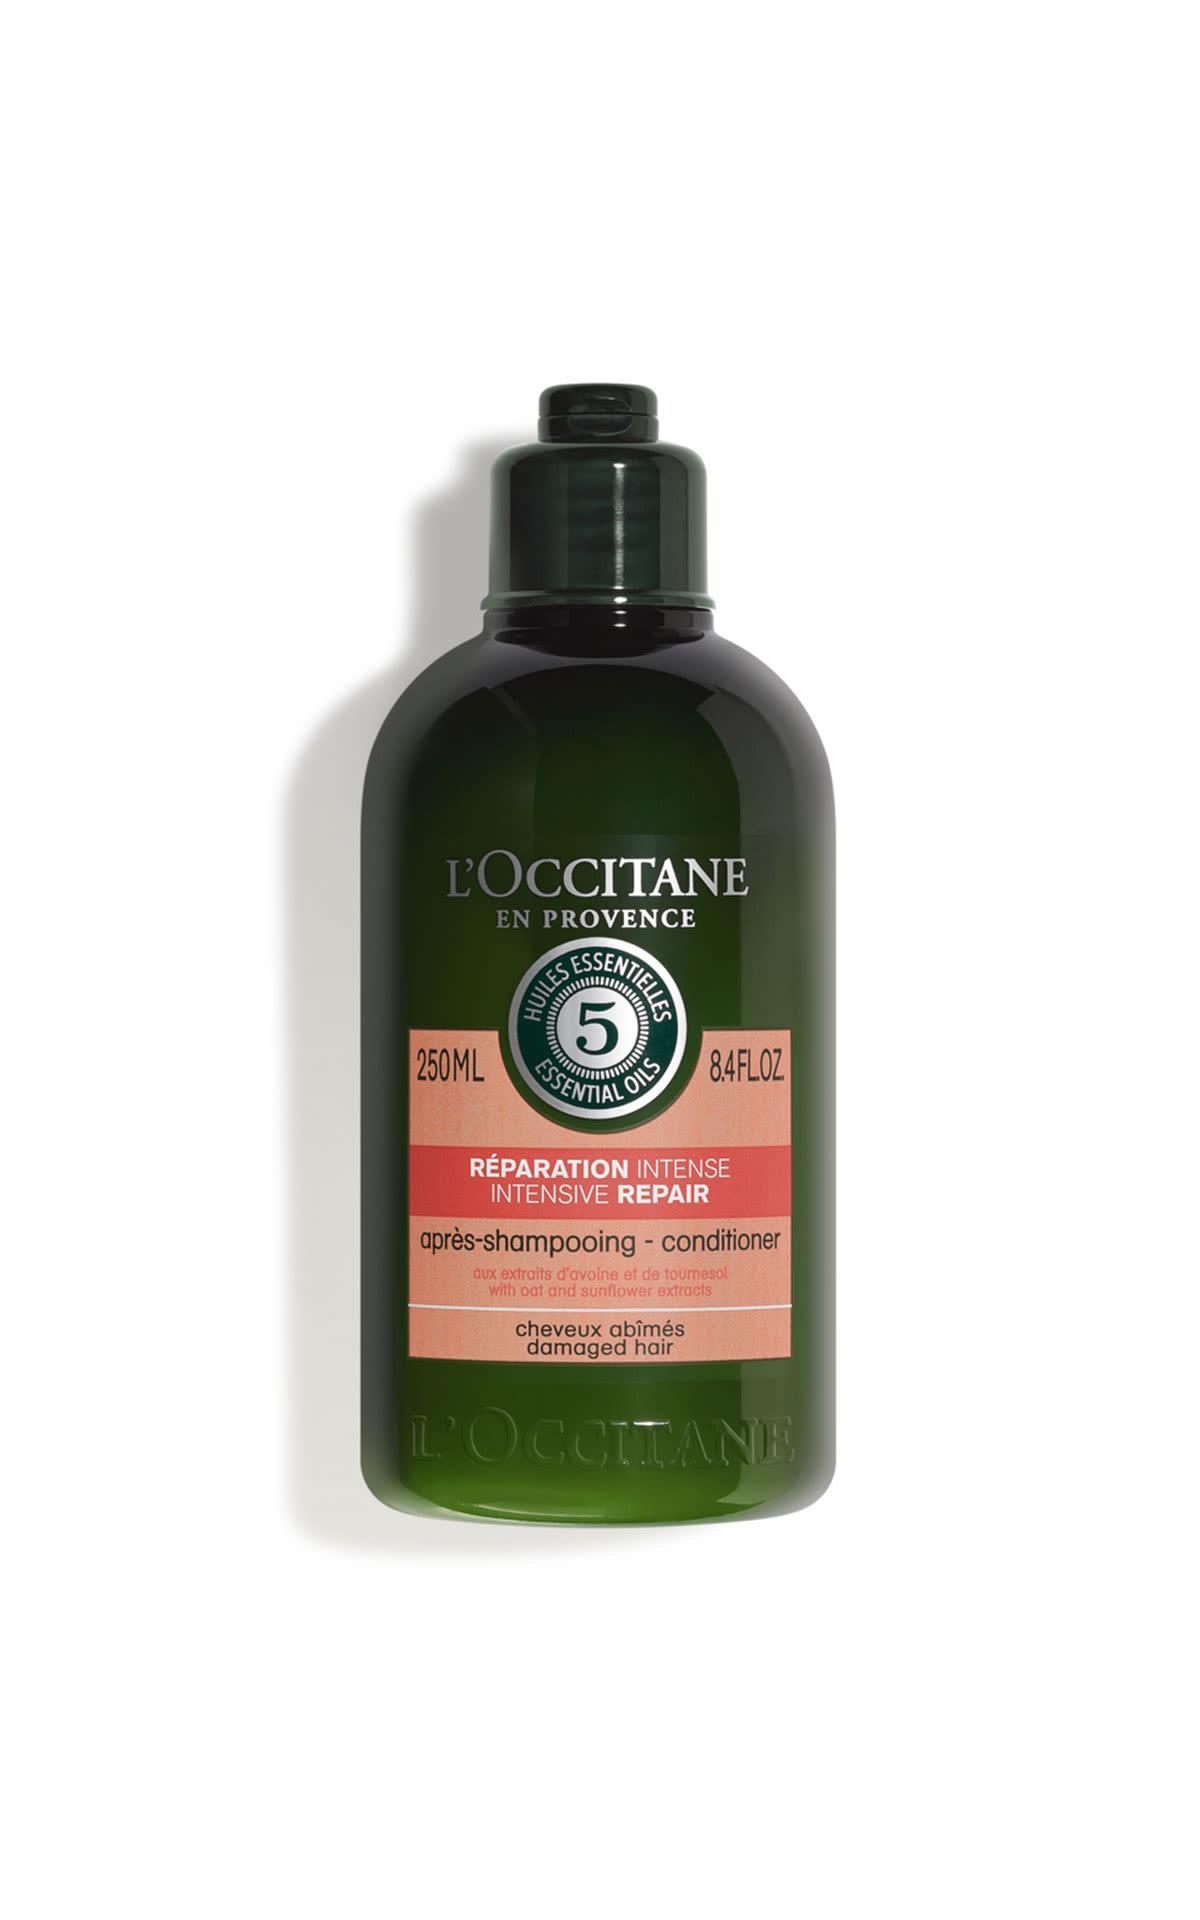 L'Occitane en Provence Intensive repair conditioner 250ml from Bicester Village